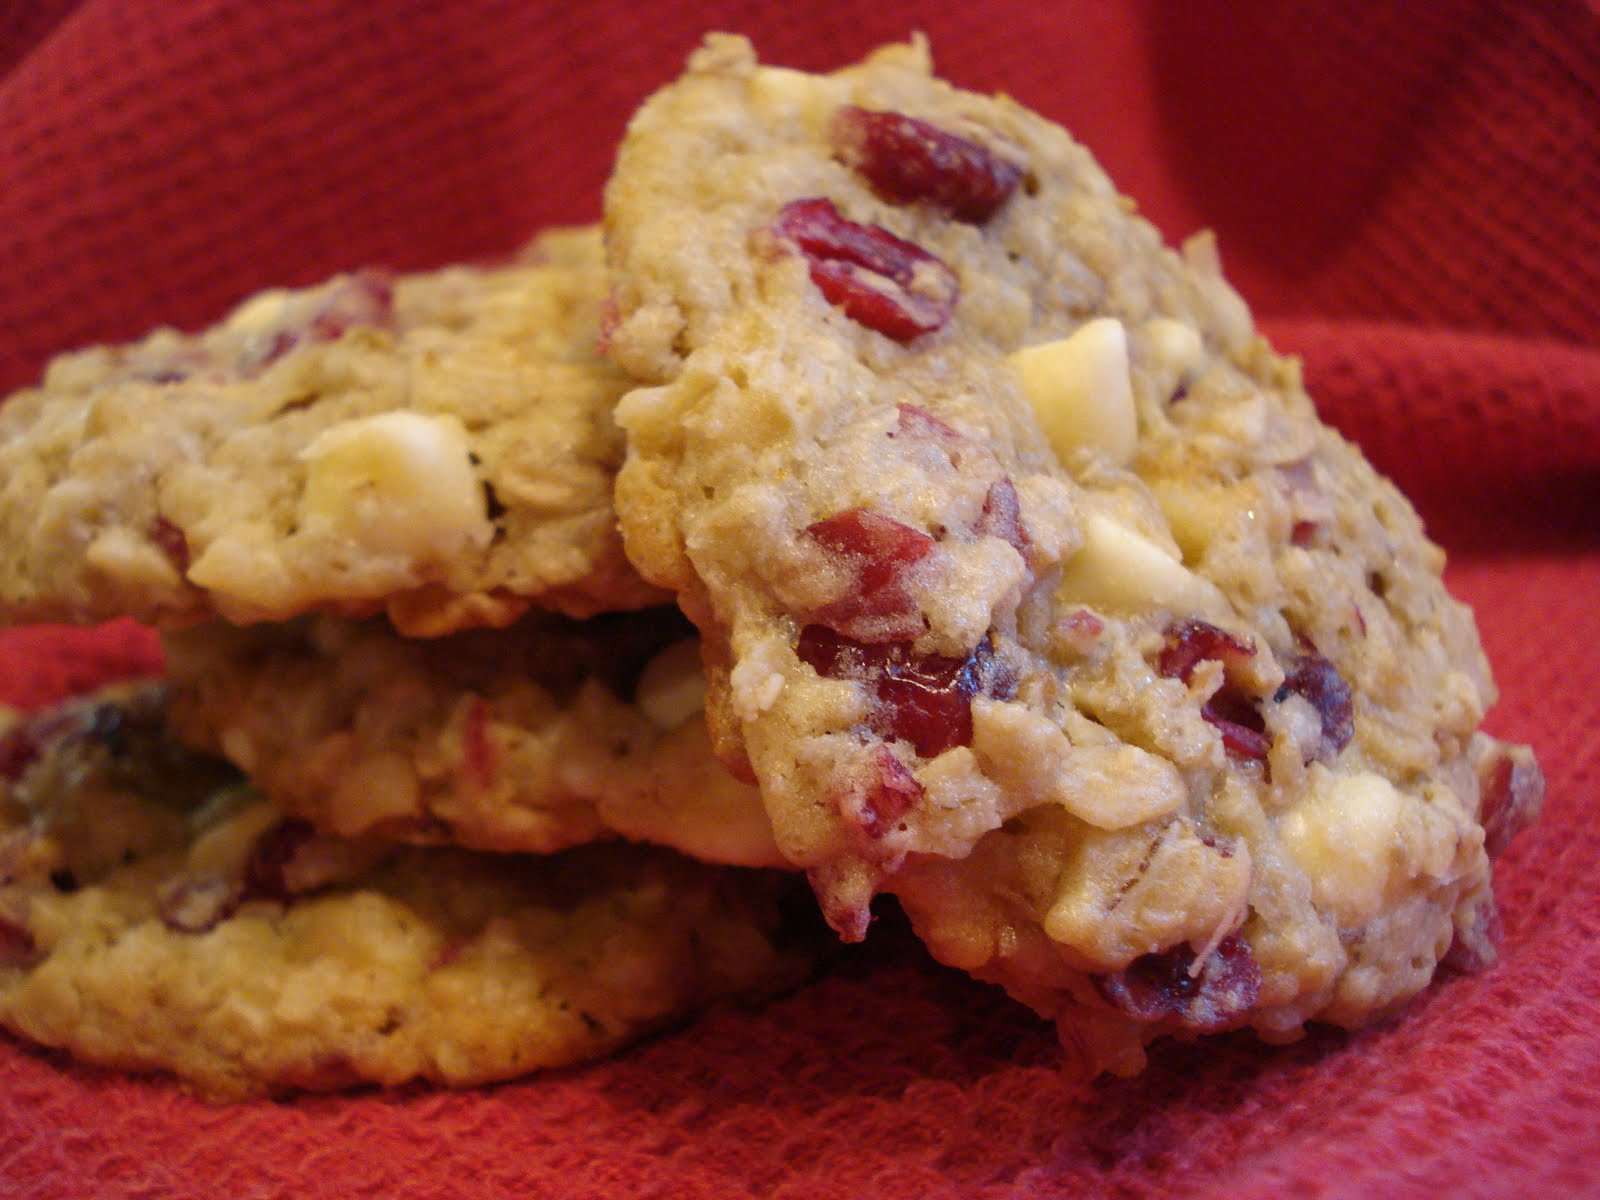 White Chocolate Cranberry Oatmeal Cookies
 The Cookie Scoop White Chocolate Cranberry Oatmeal Cookie